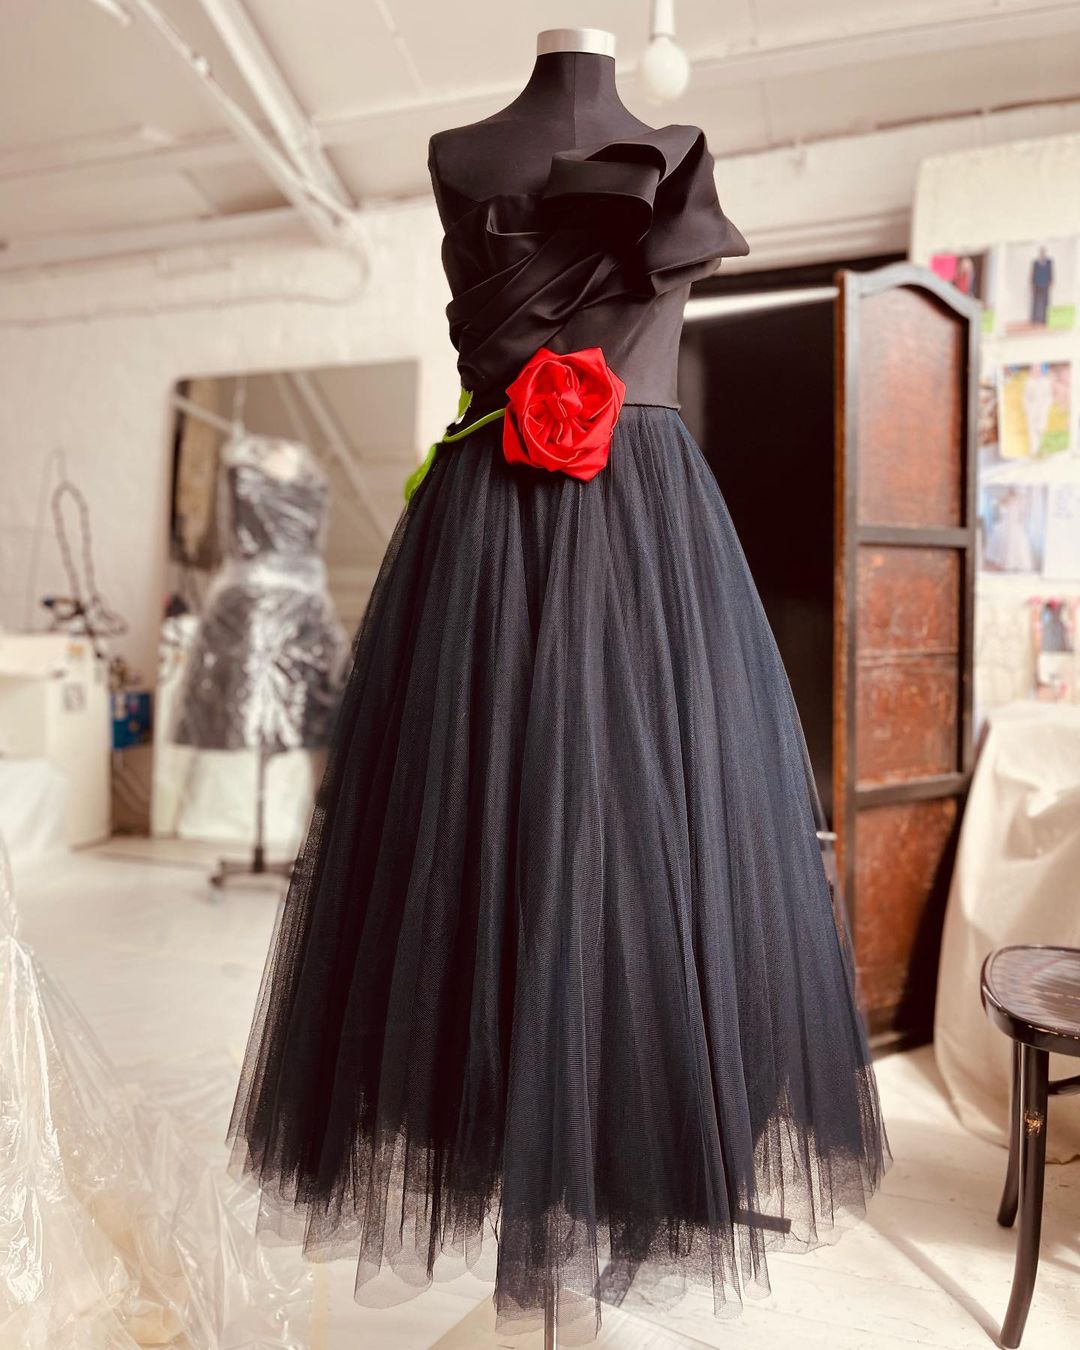 Giles Deacon, Black dress, red rose The London-based designer talks to Emma Sells about creating Great British couture, making clothes that have meaning and why he’s never wanted to be pigeonholed